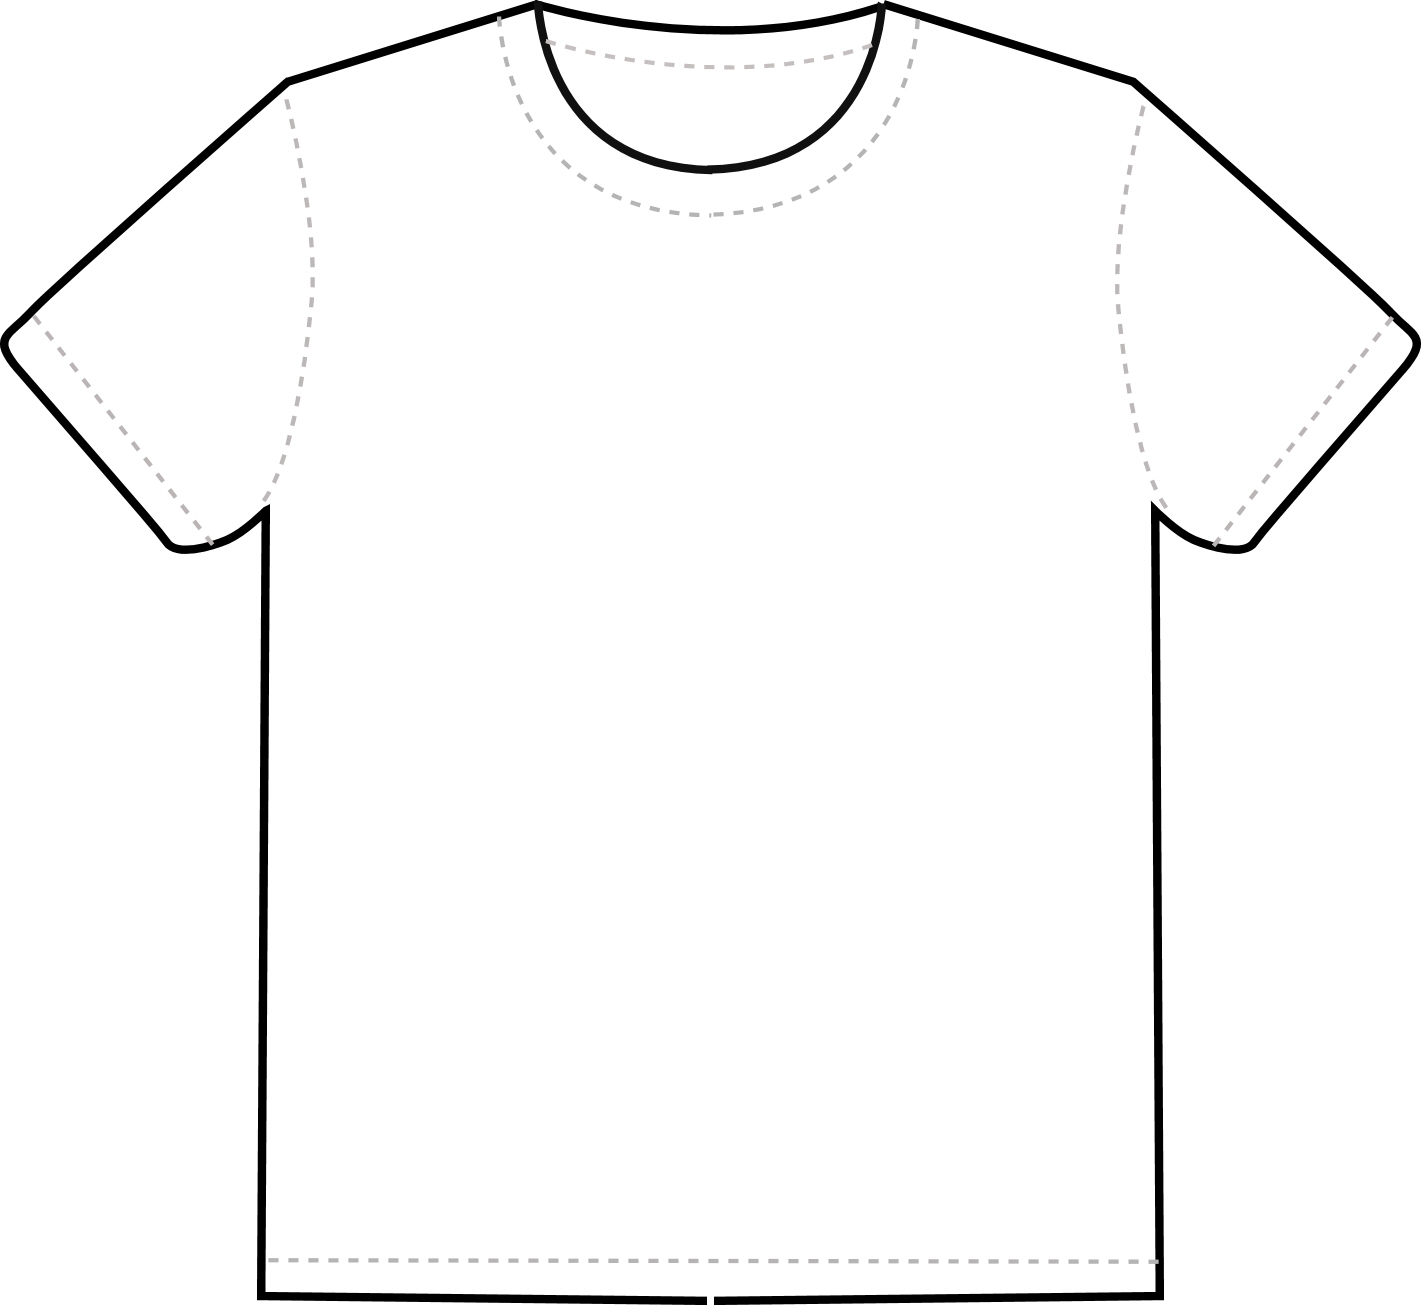 Design The T Shirt Using This Template To Help You  It Must Include